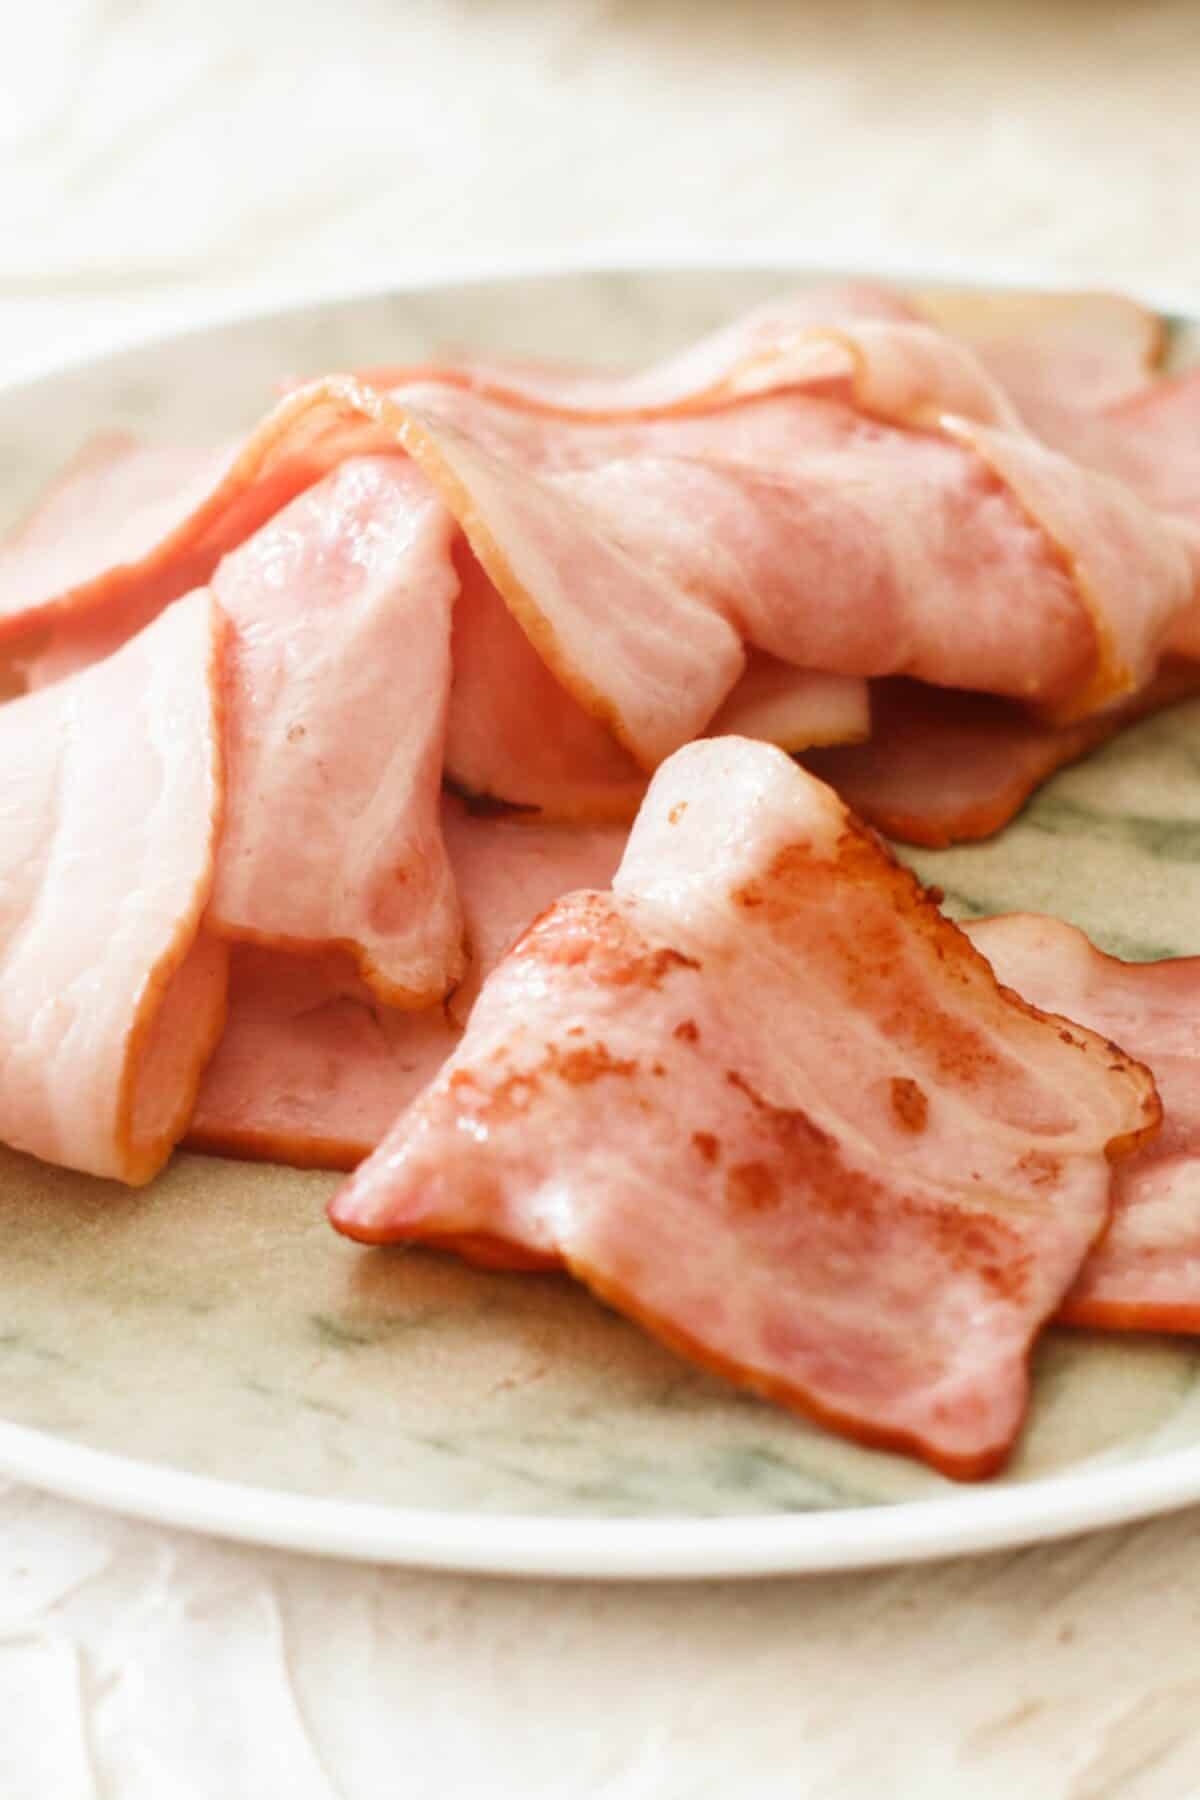 Golden crispy bacon slices on a plate